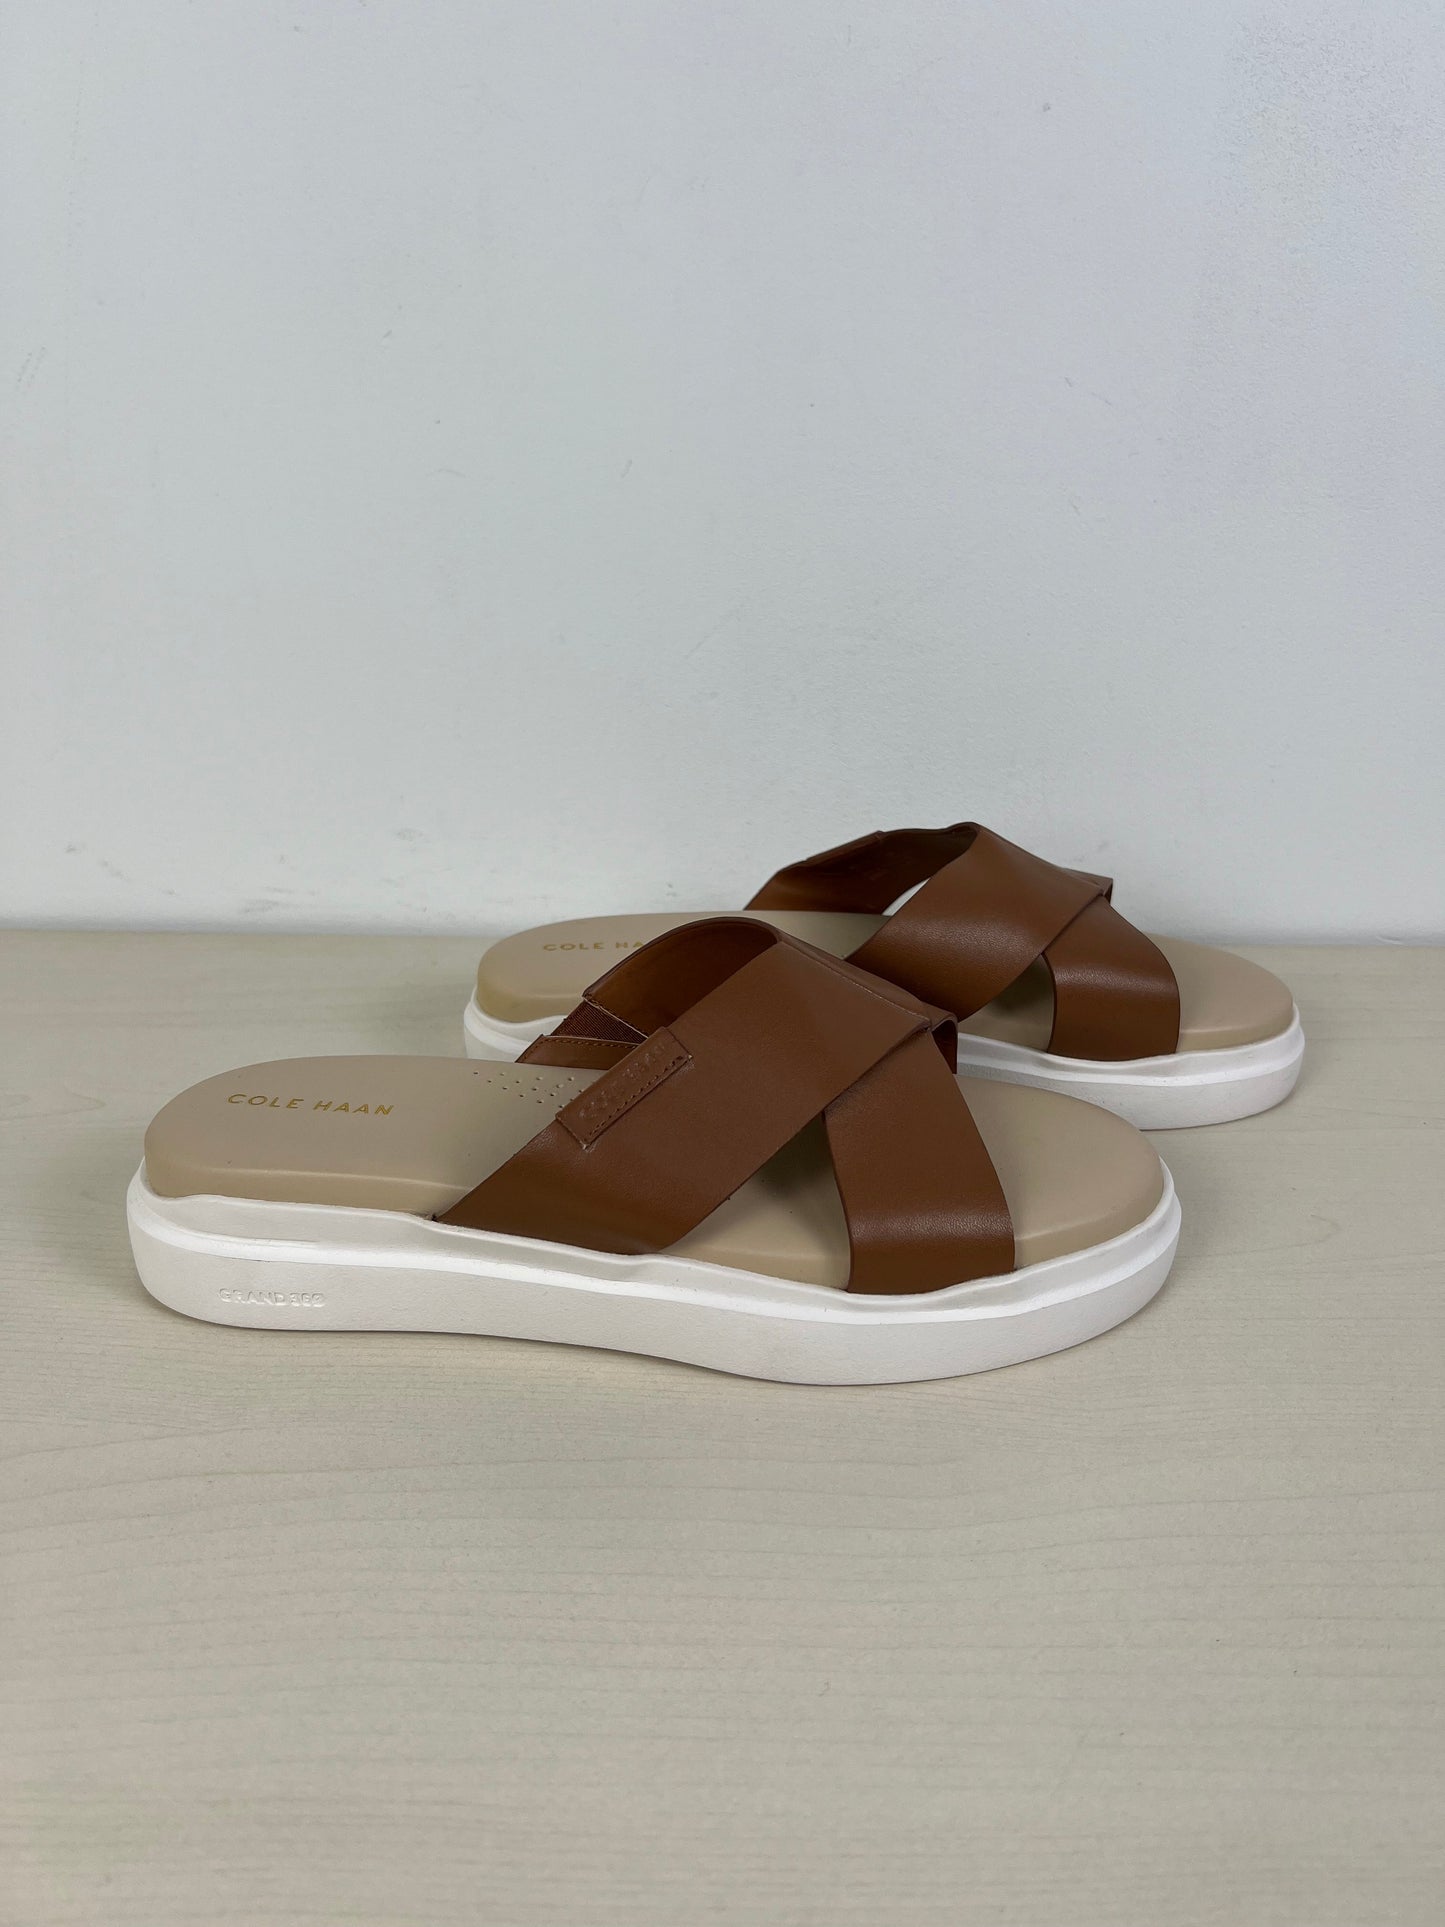 Brown & White Sandals Flats Cole-haan, Size 8